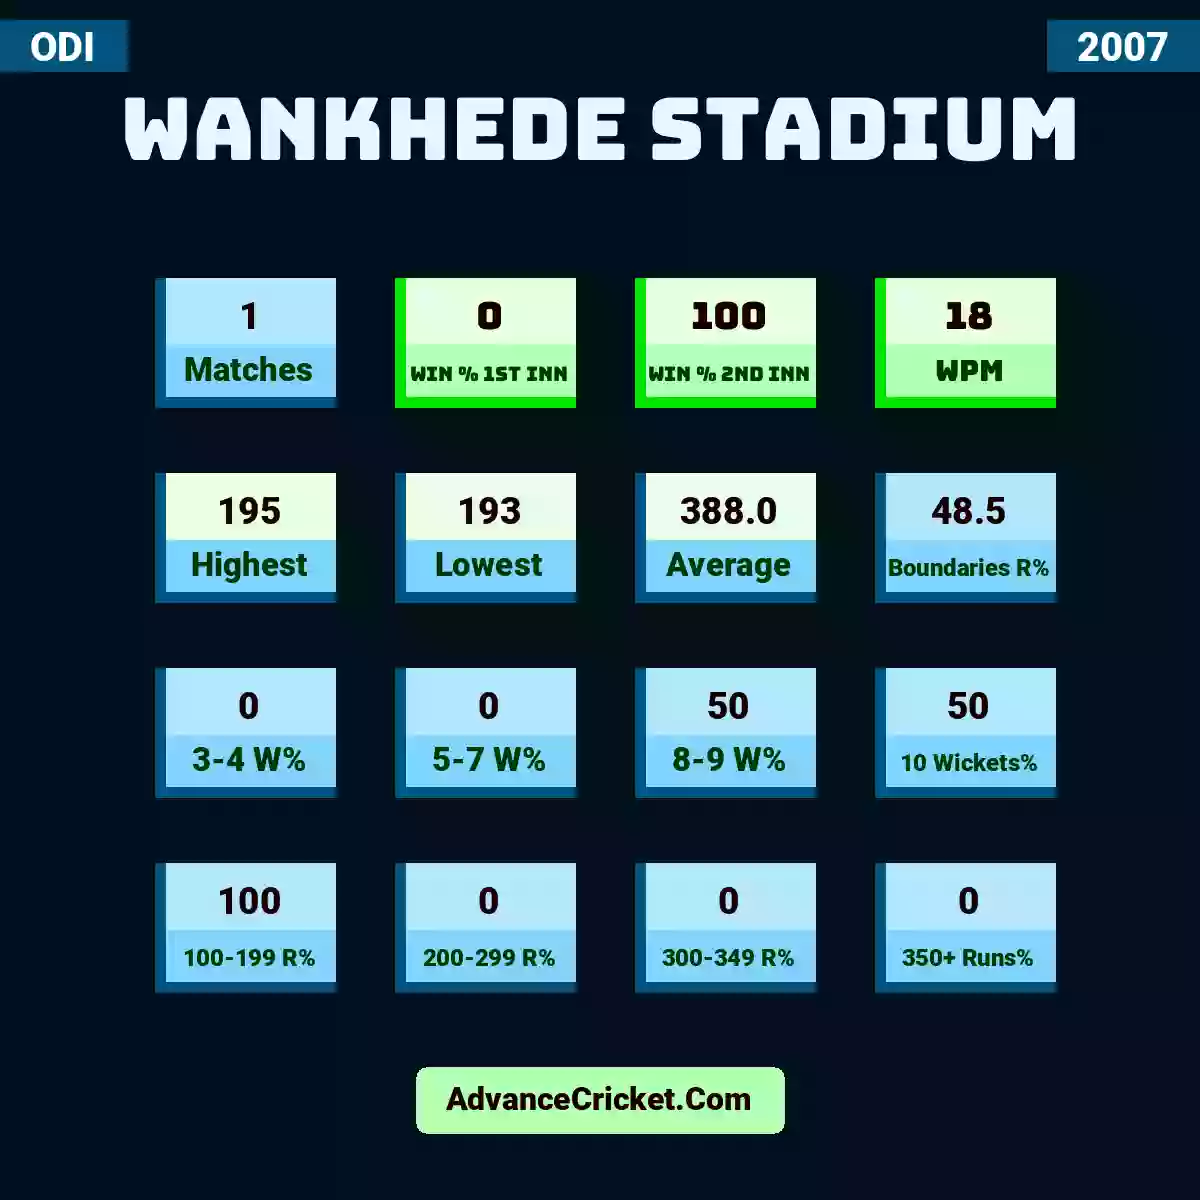 Image showing Wankhede Stadium with Matches: 1, Win % 1st Inn: 0, Win % 2nd Inn: 100, WPM: 18, Highest: 195, Lowest: 193, Average: 388.0, Boundaries R%: 48.5, 3-4 W%: 0, 5-7 W%: 0, 8-9 W%: 50, 10 Wickets%: 50, 100-199 R%: 100, 200-299 R%: 0, 300-349 R%: 0, 350+ Runs%: 0.